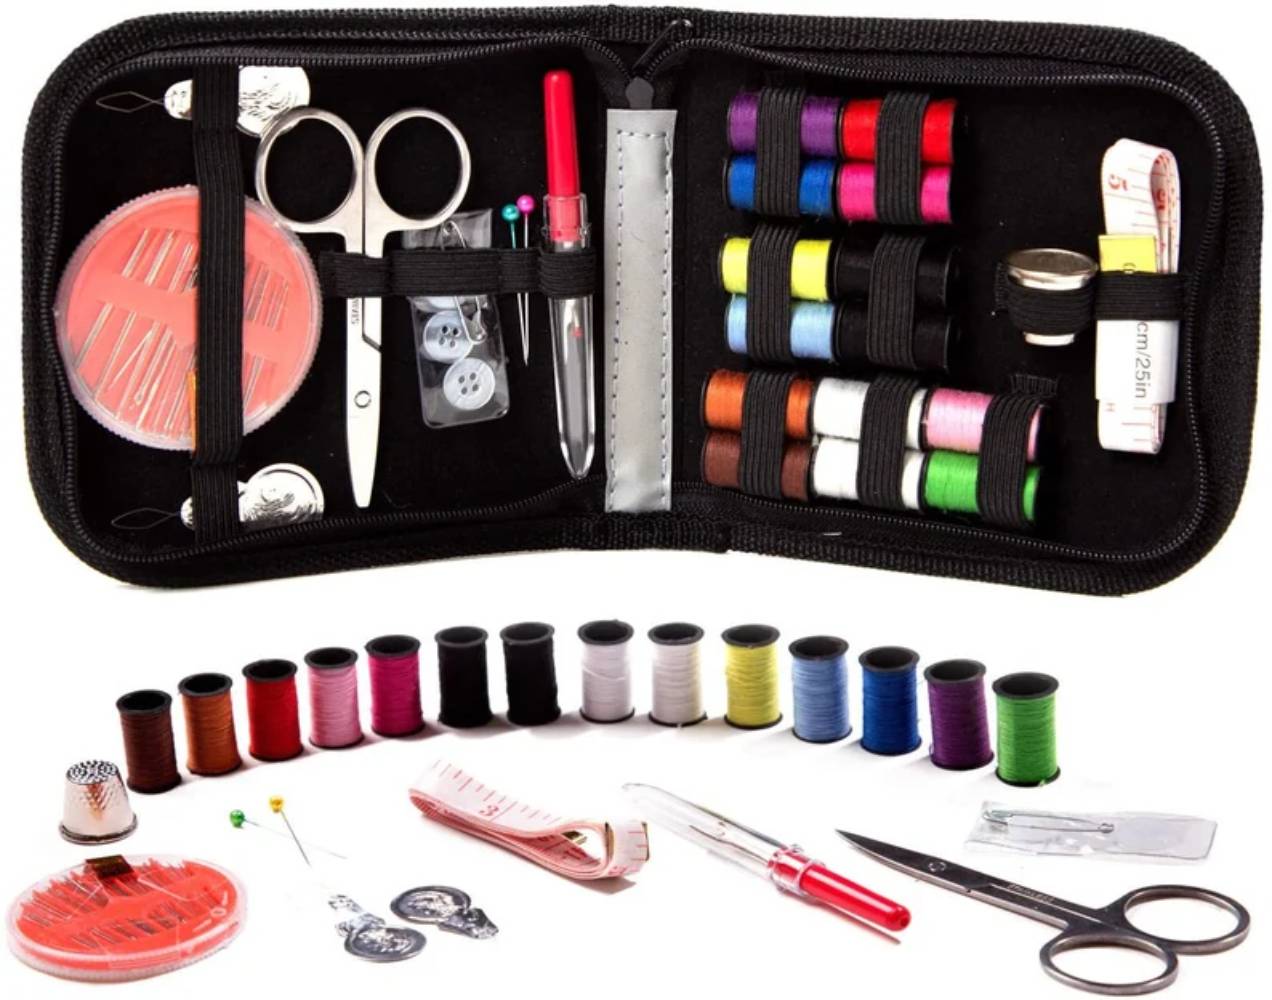 Mini Sewing Kit for Home, Travel & Emergencies with Sewing